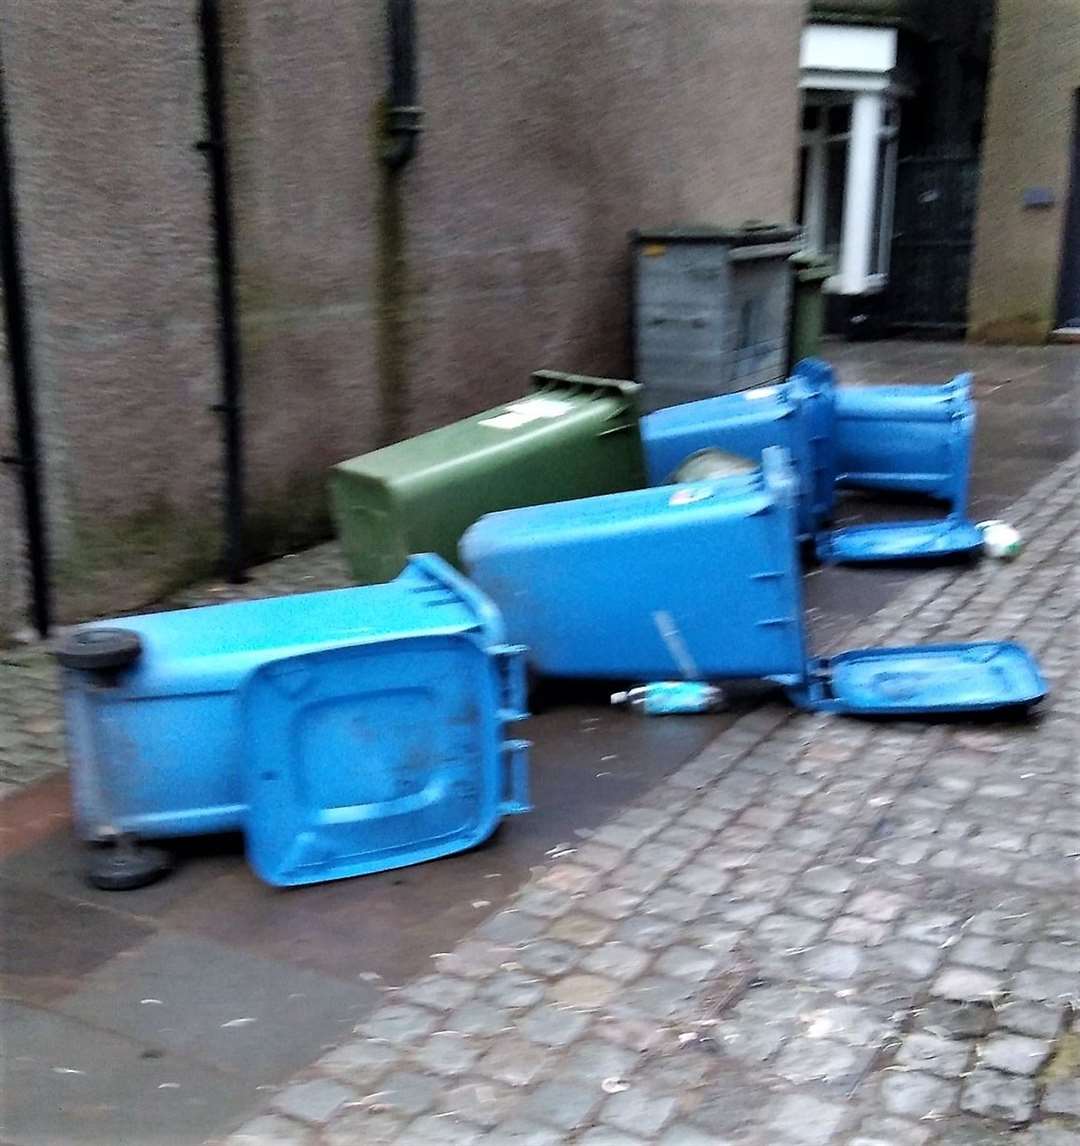 Recycle bins knocked over in Wick town centre after the Hogmanay revelling. Picture: Derek Bremner